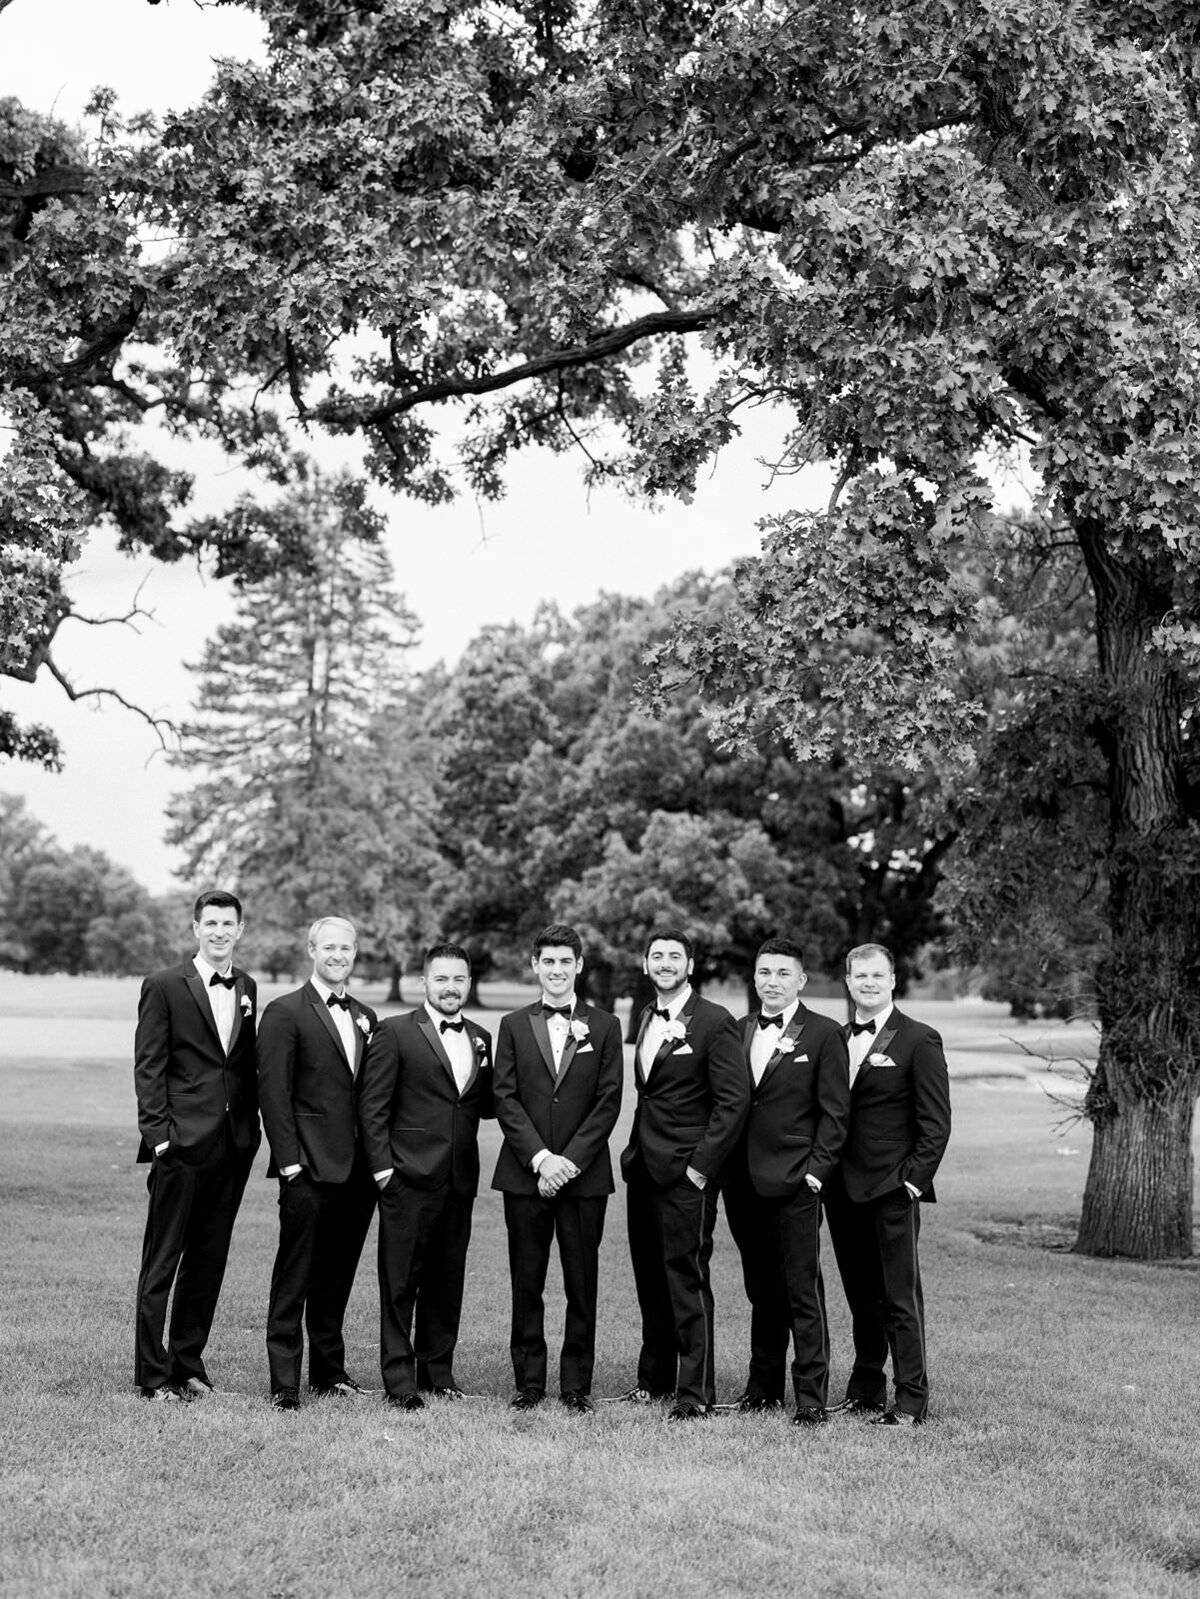 Wedding-Party-at-Rockford-Country-Club-with-Clementine-Events-Chicago-and-Sarah-Sunstrom-Photography